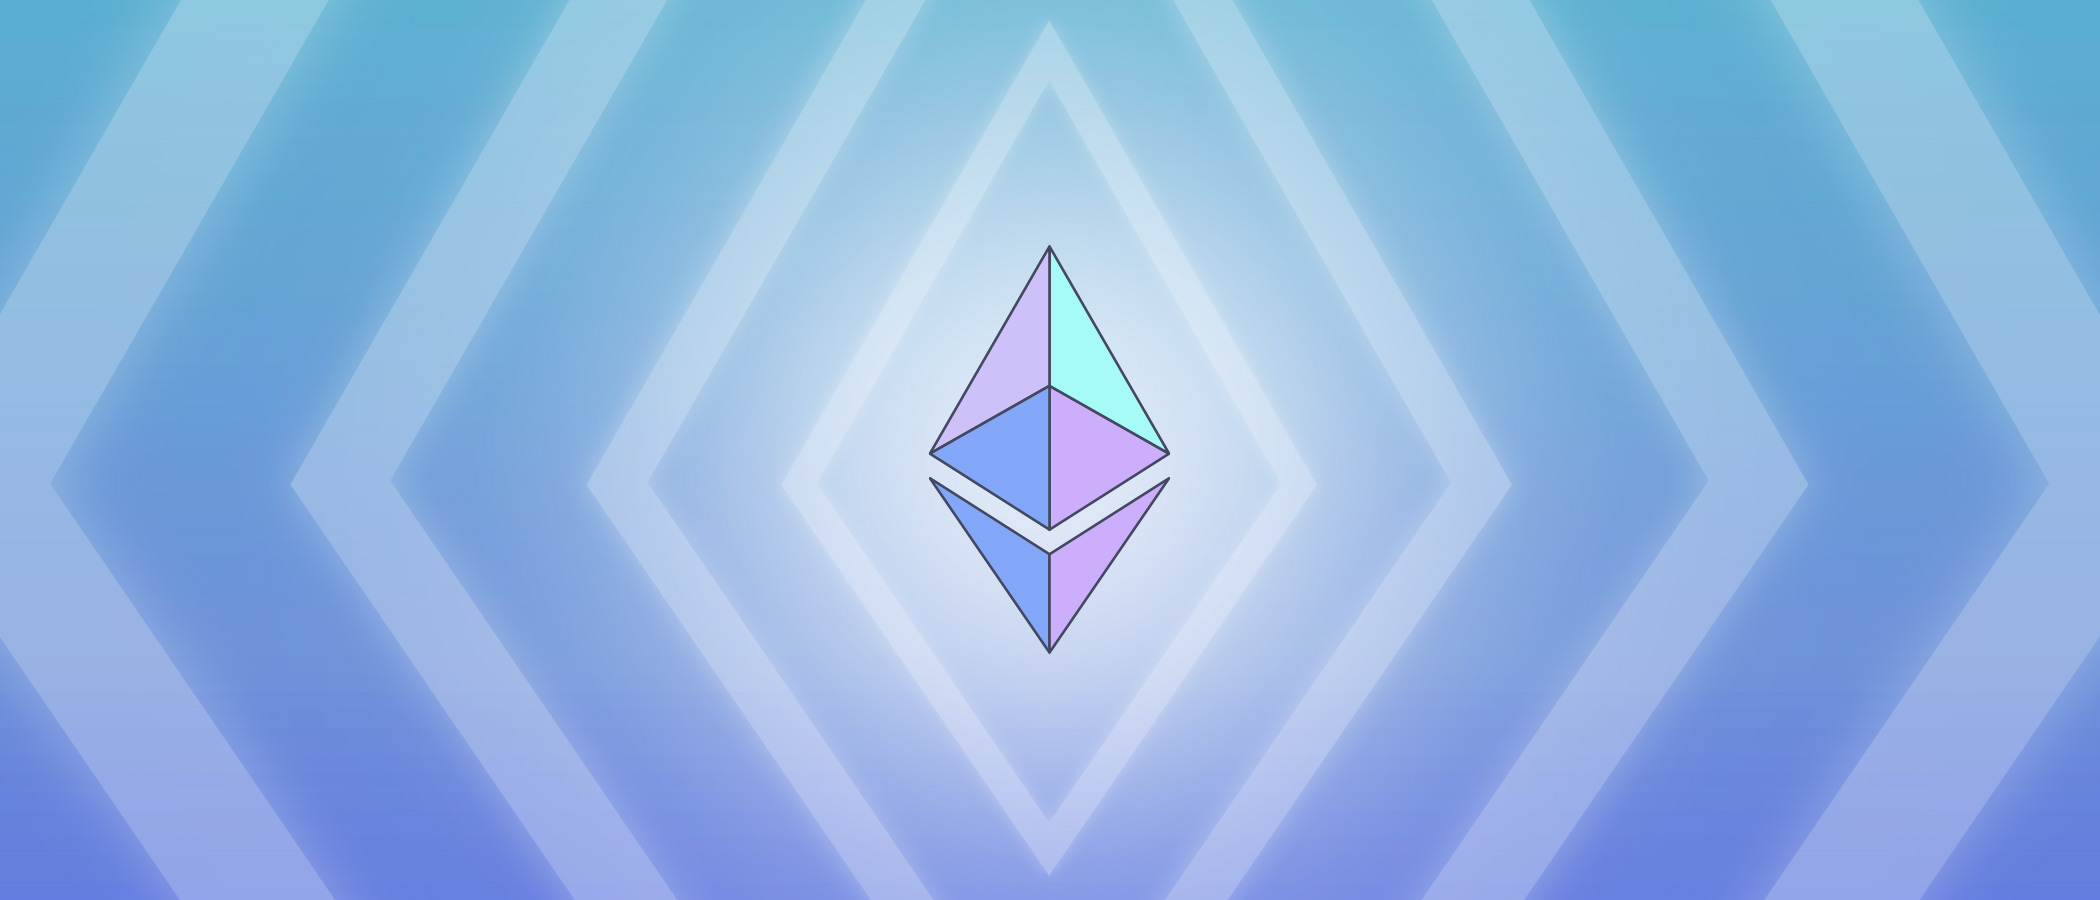 Ambients Applied to Ethereum